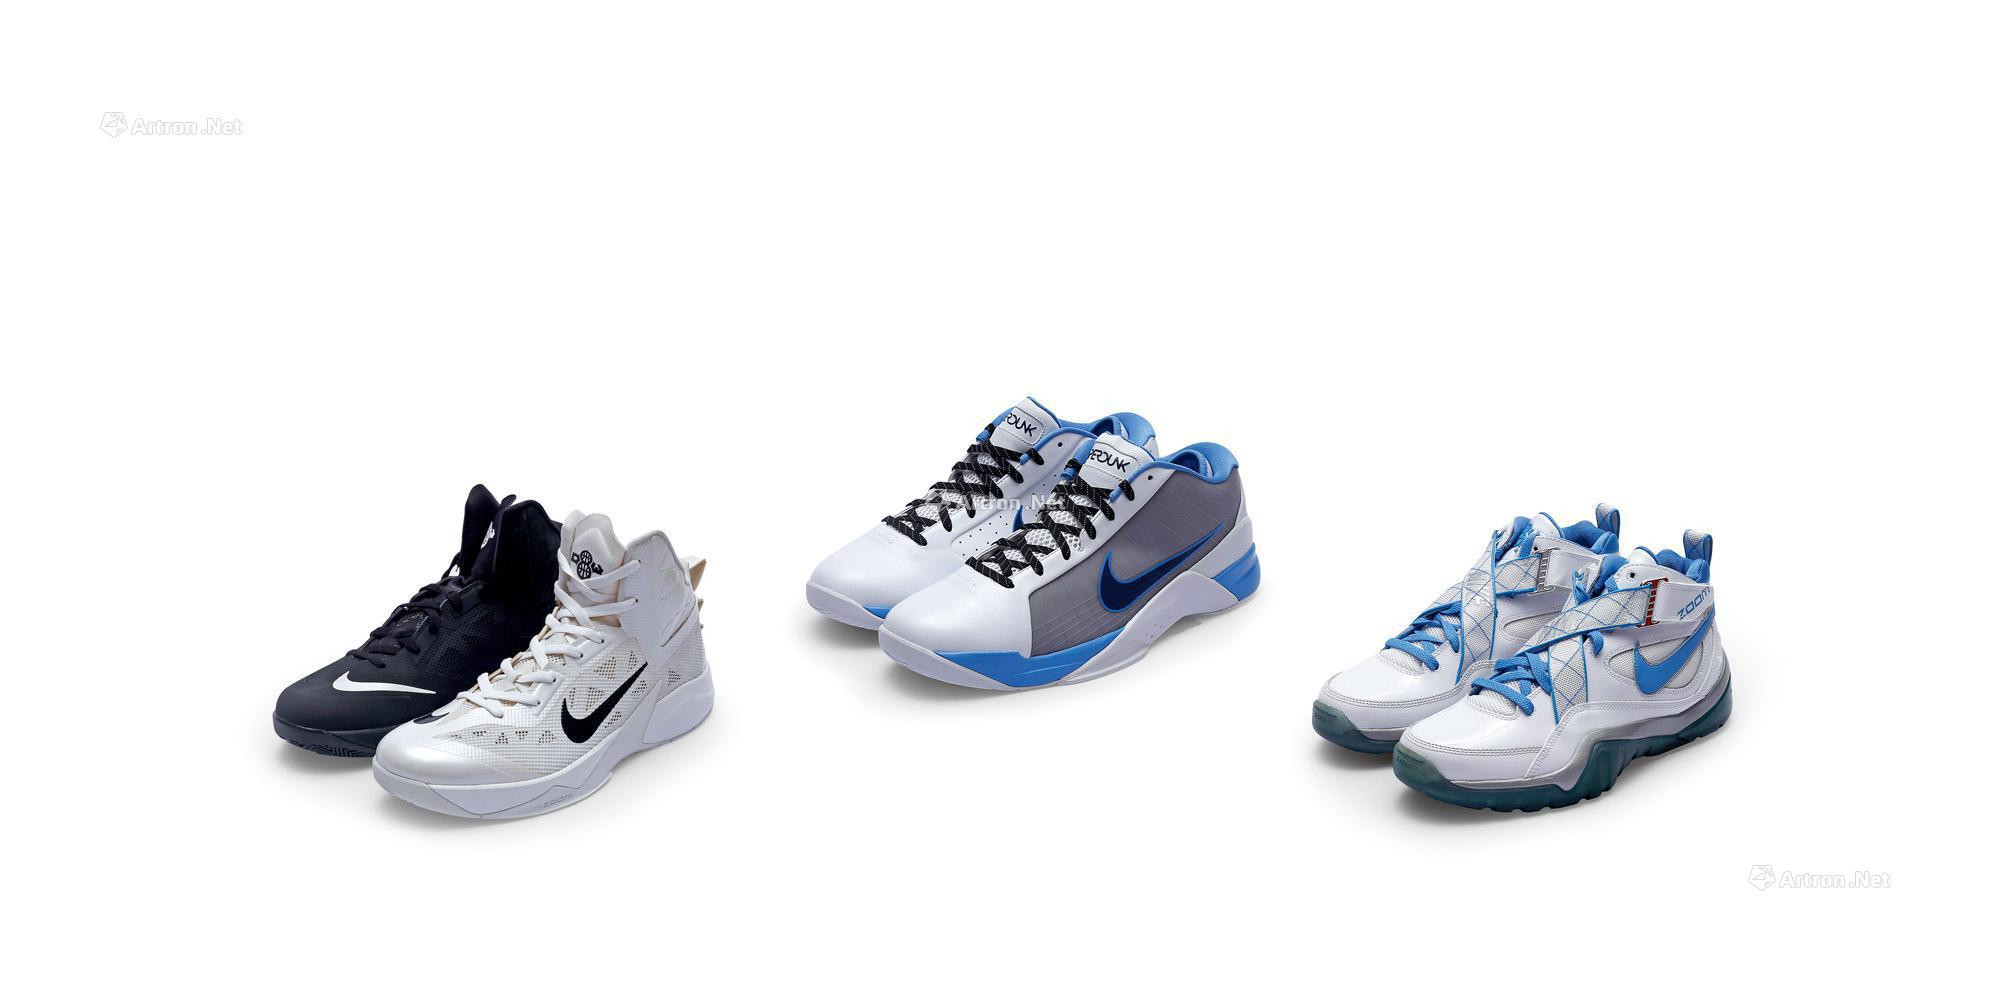 Deron Williams Exclusive Sneaker Collection  3 Pairs of Player Exclusive Sneakers